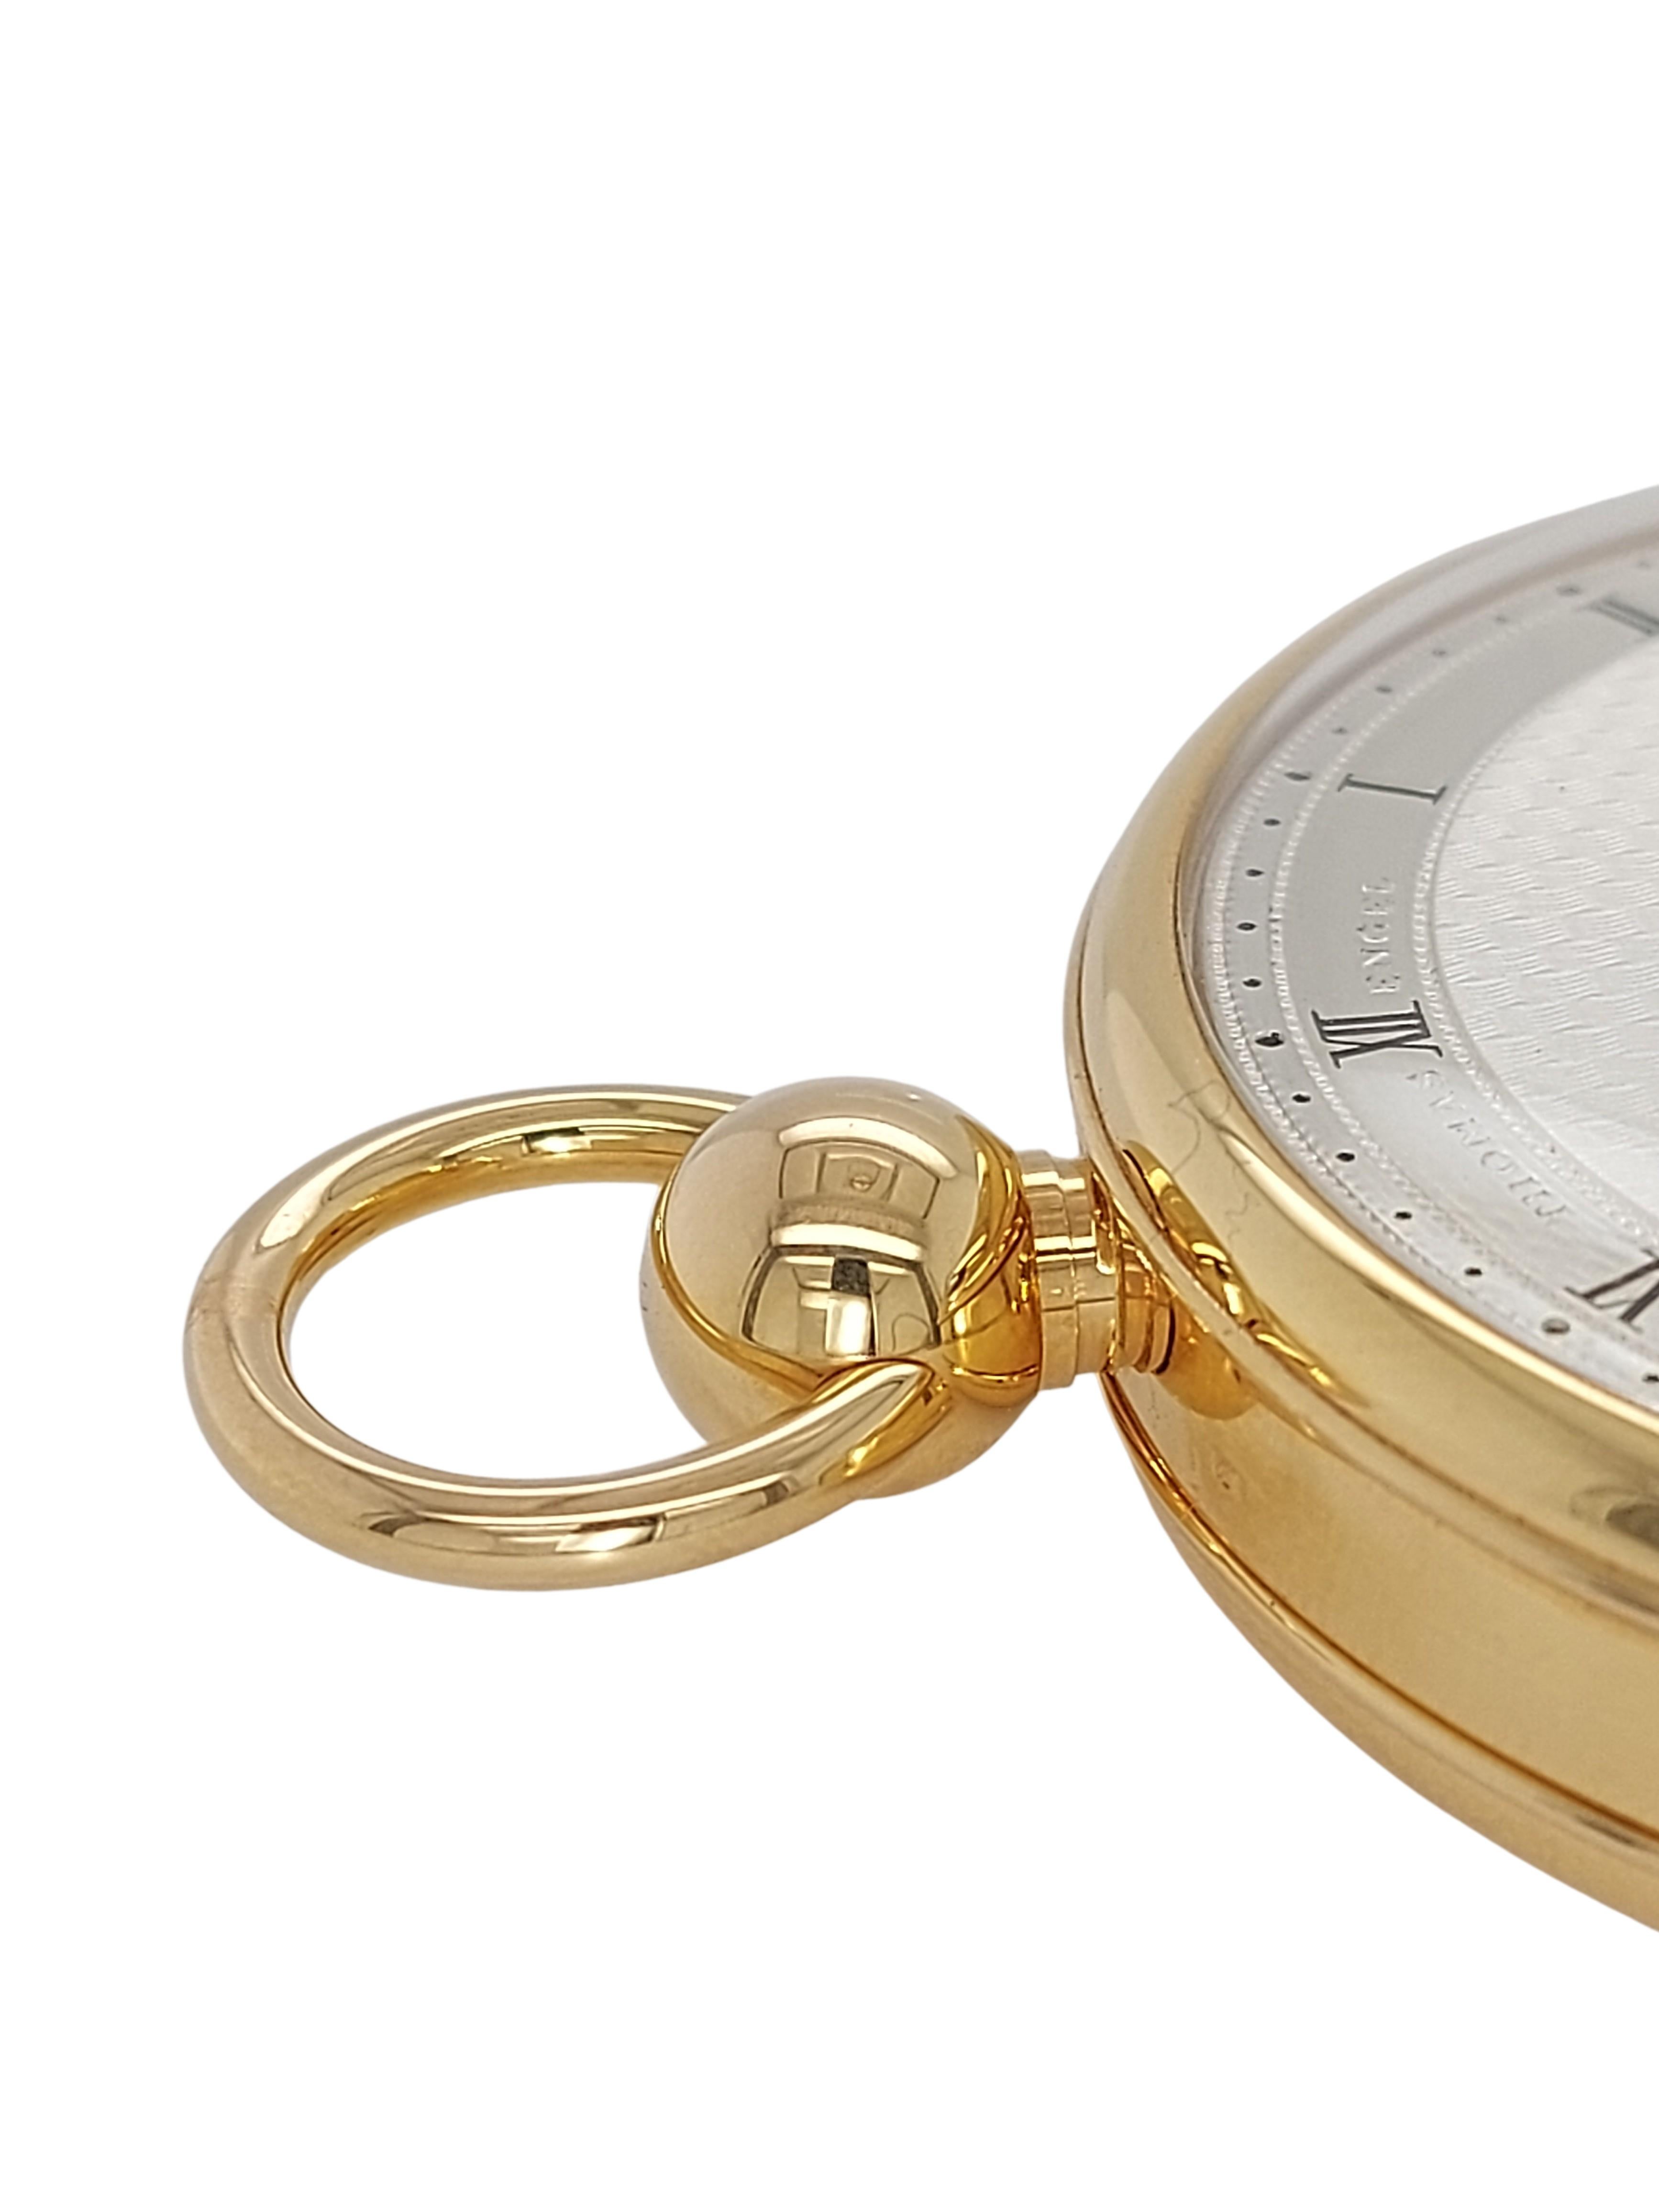 Artisan 18kt Rose Zenith Open Face Pocket Watch Thomas Engel No° 9 with Box & Papers! For Sale